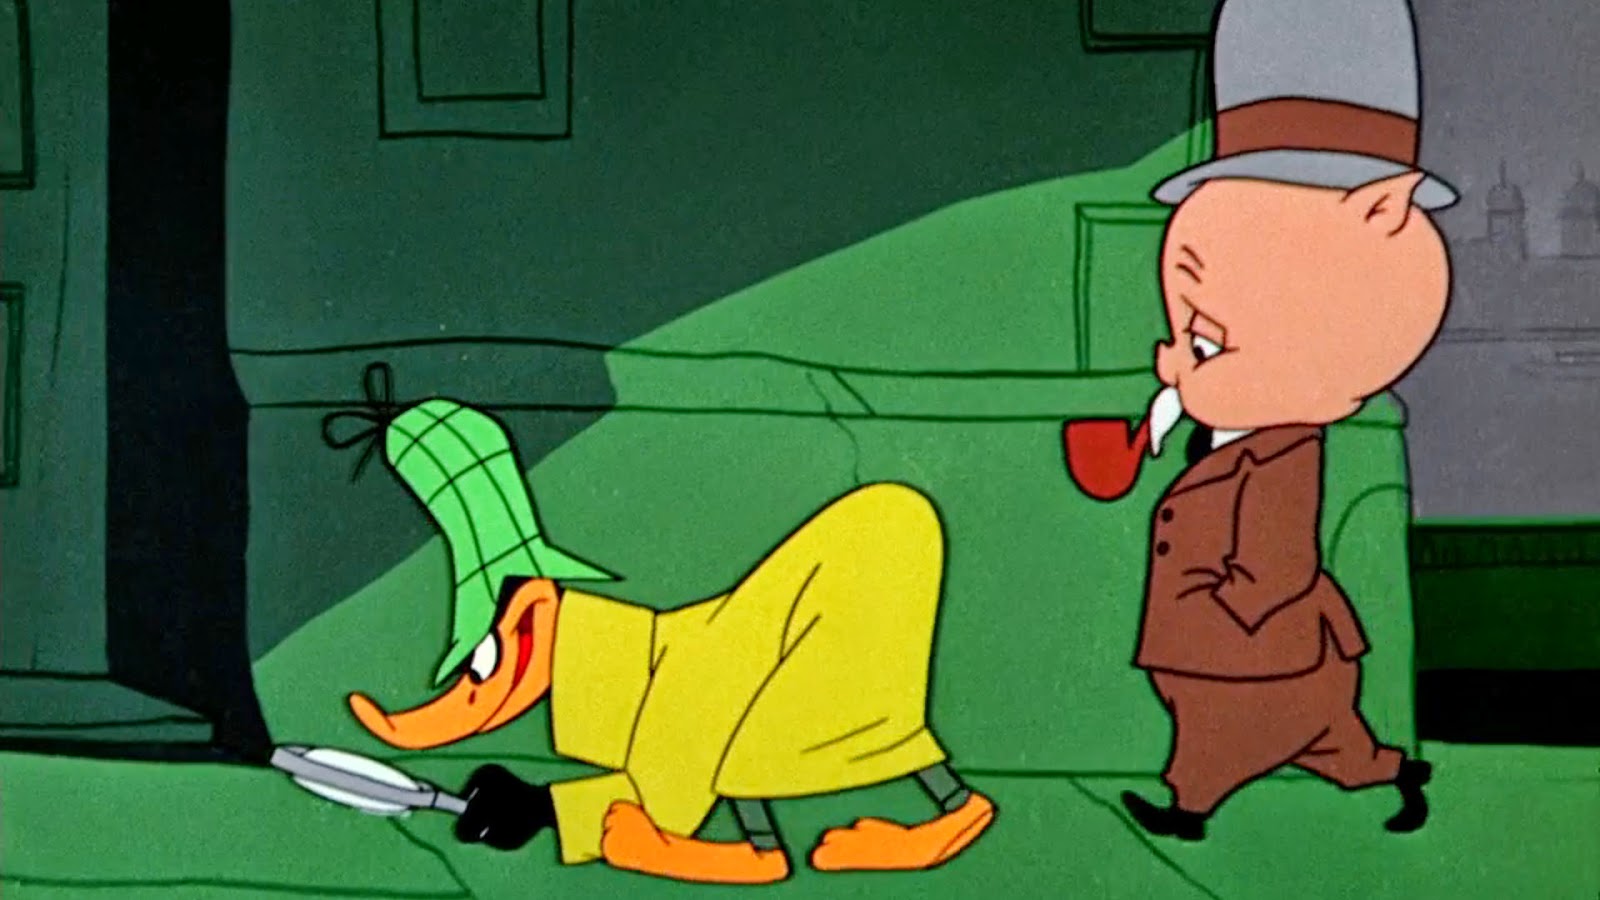 The Adventure of the Shropshire Slasher is brought to life by Daffy Duck as Sherlock Holmes